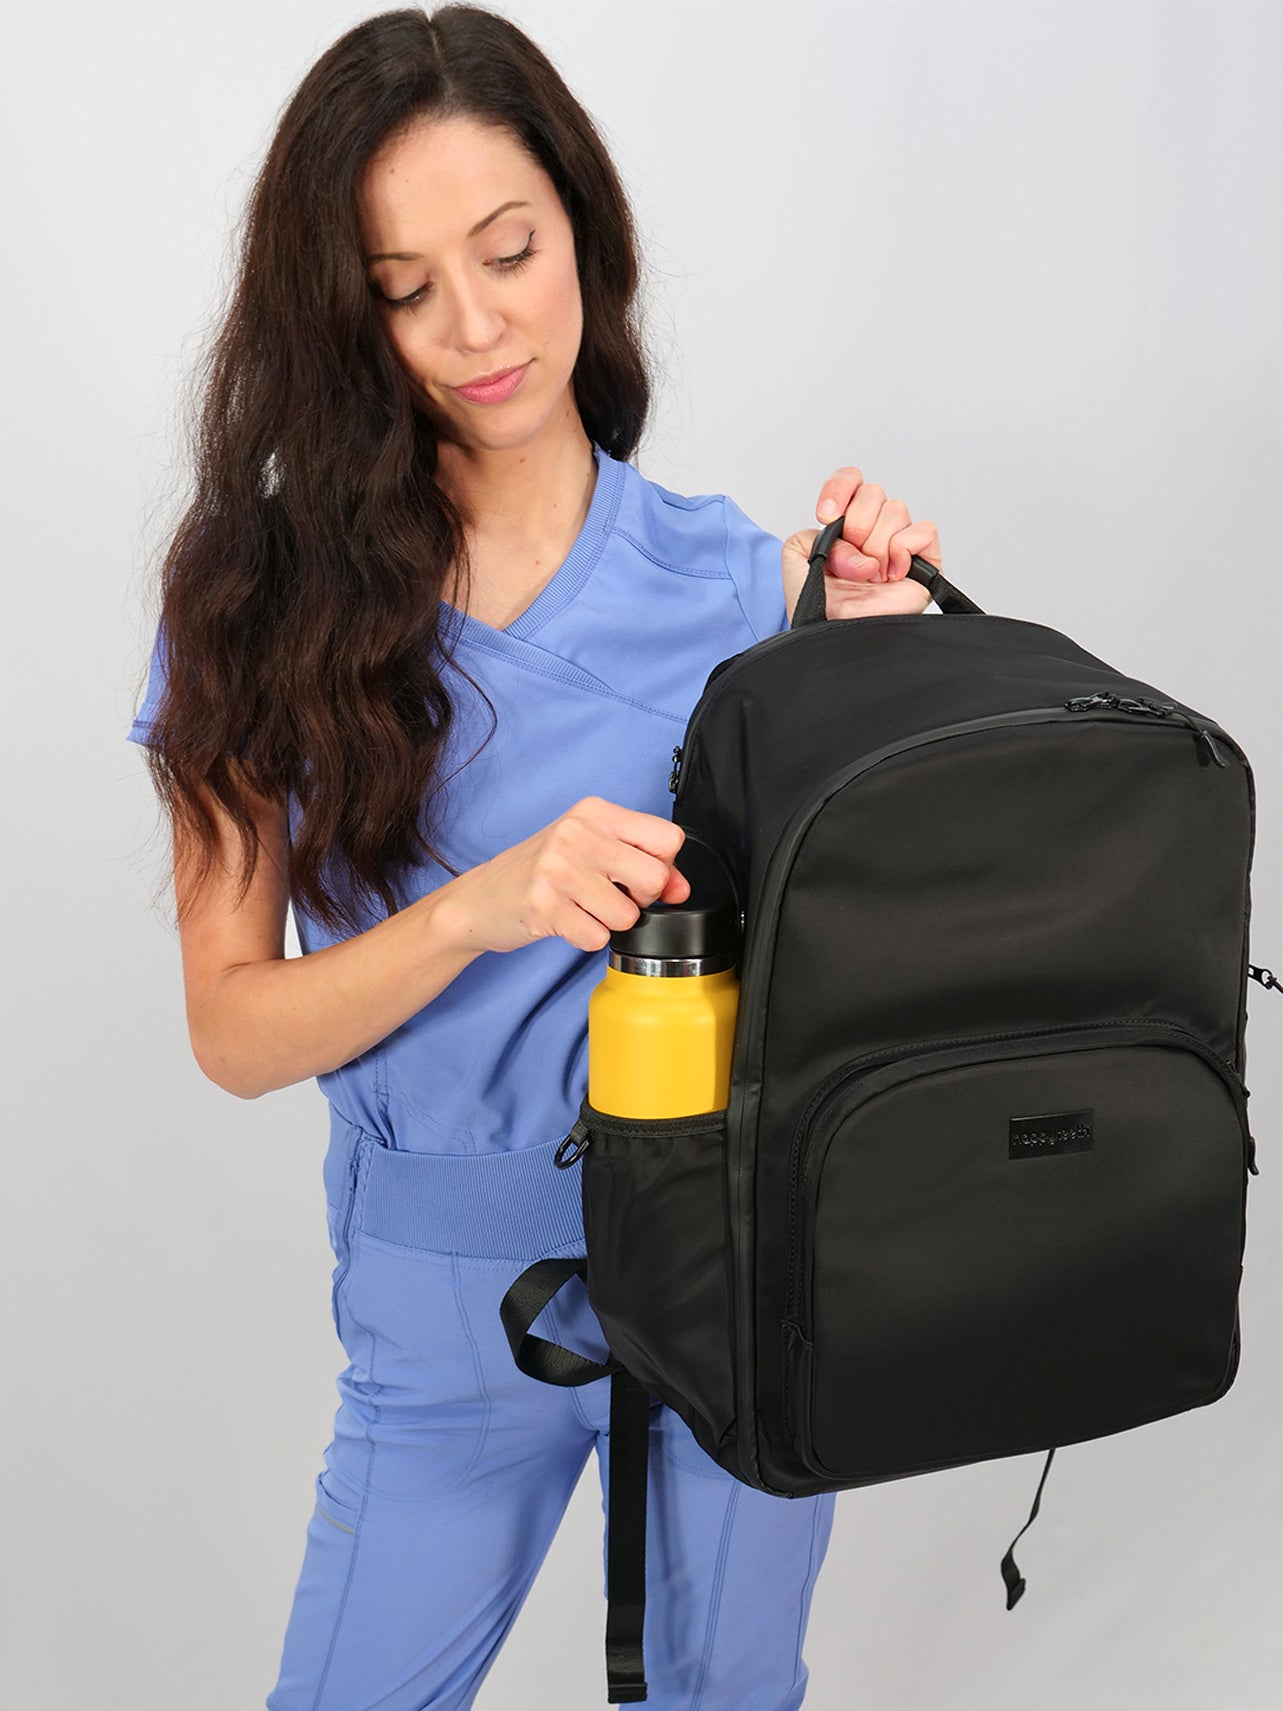 10 Best Work Bags for Nurses and Healthcare Professionals  Nurse Theory